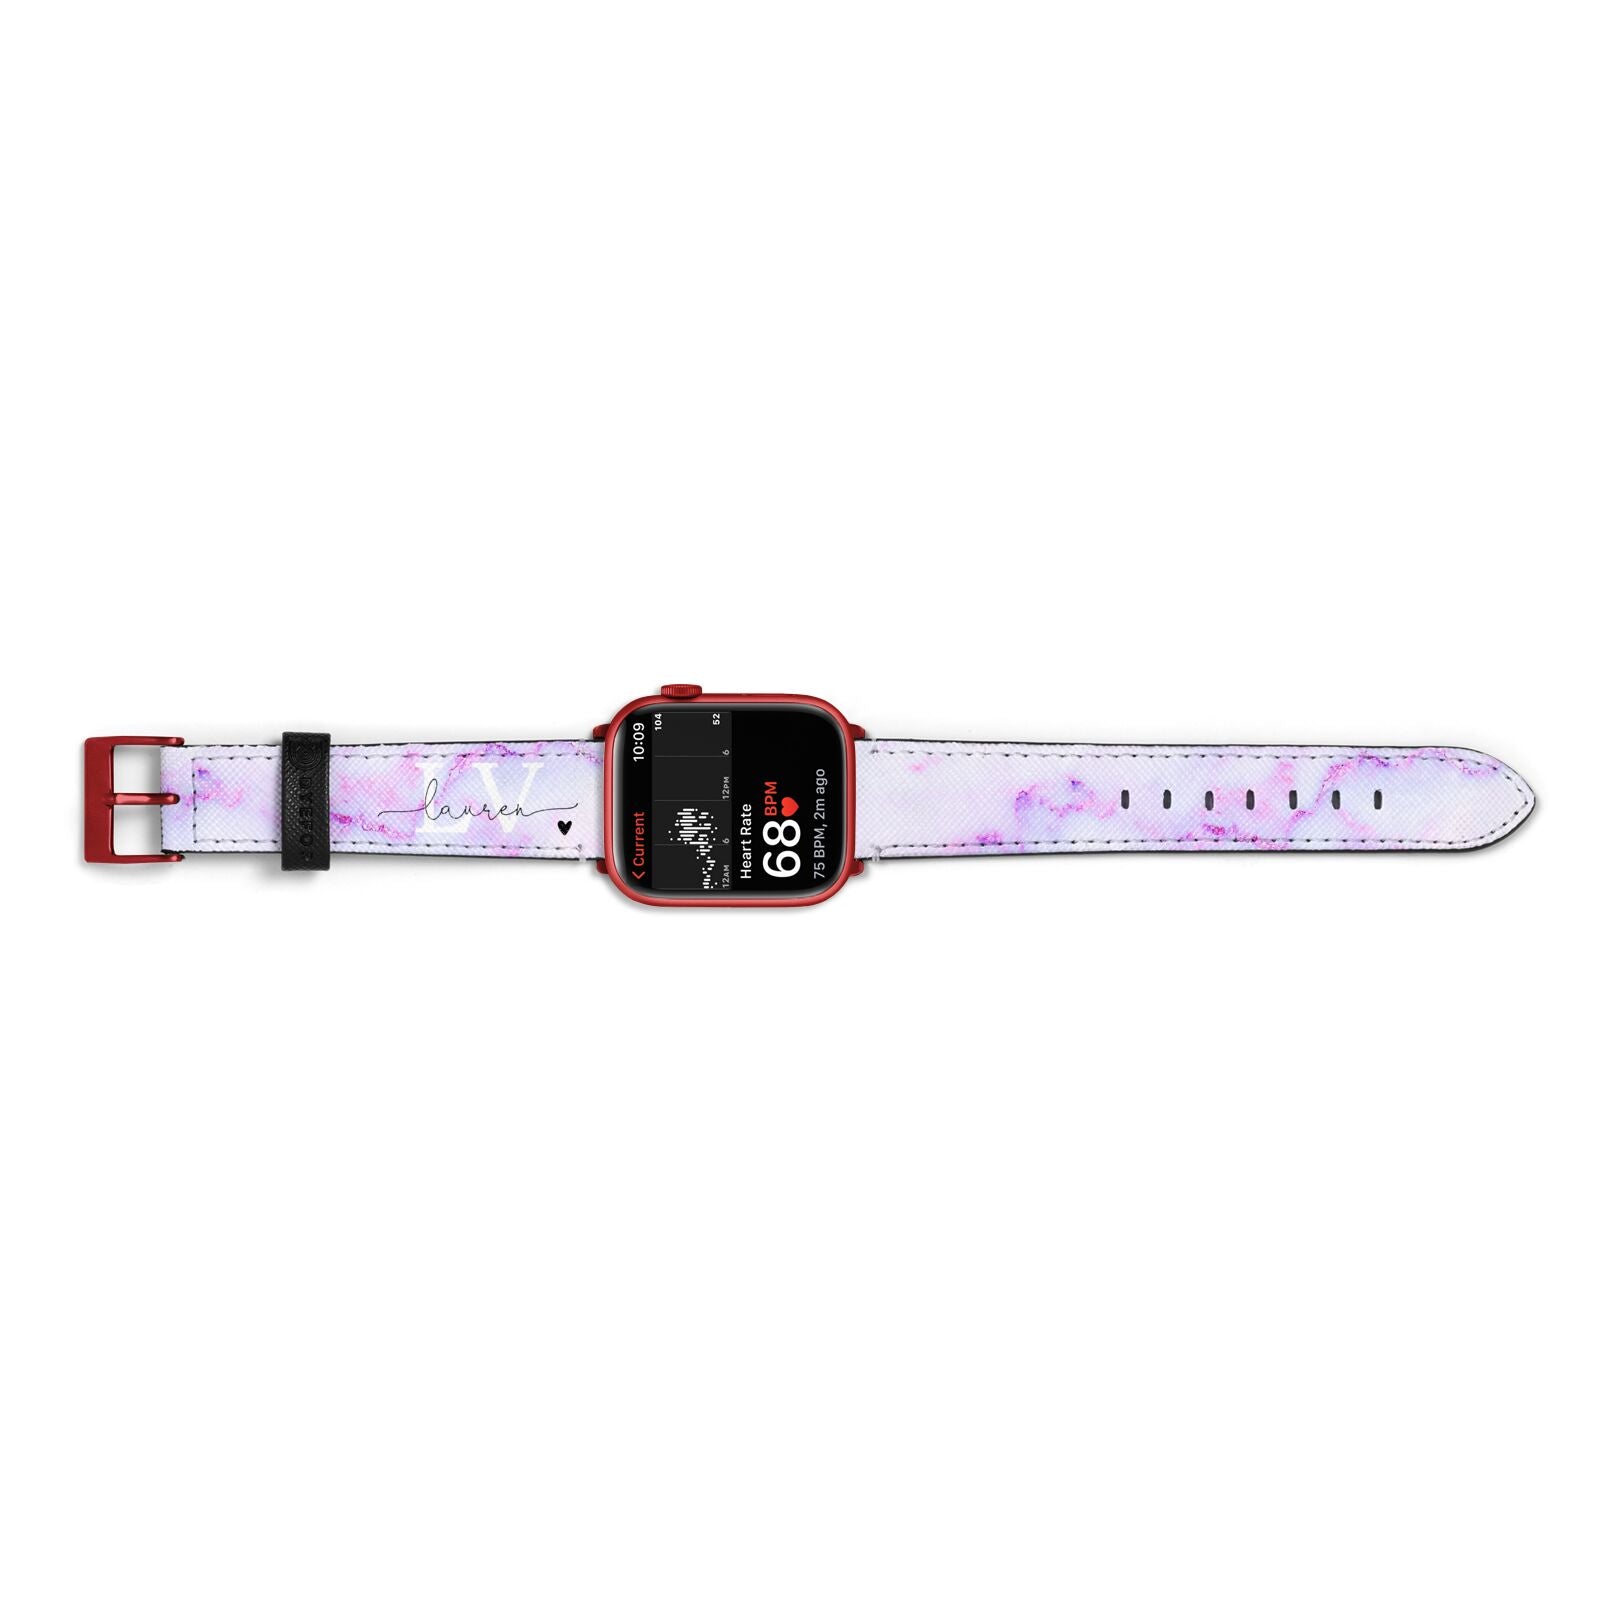 Customisable Name Initial Marble Apple Watch Strap Size 38mm Landscape Image Red Hardware